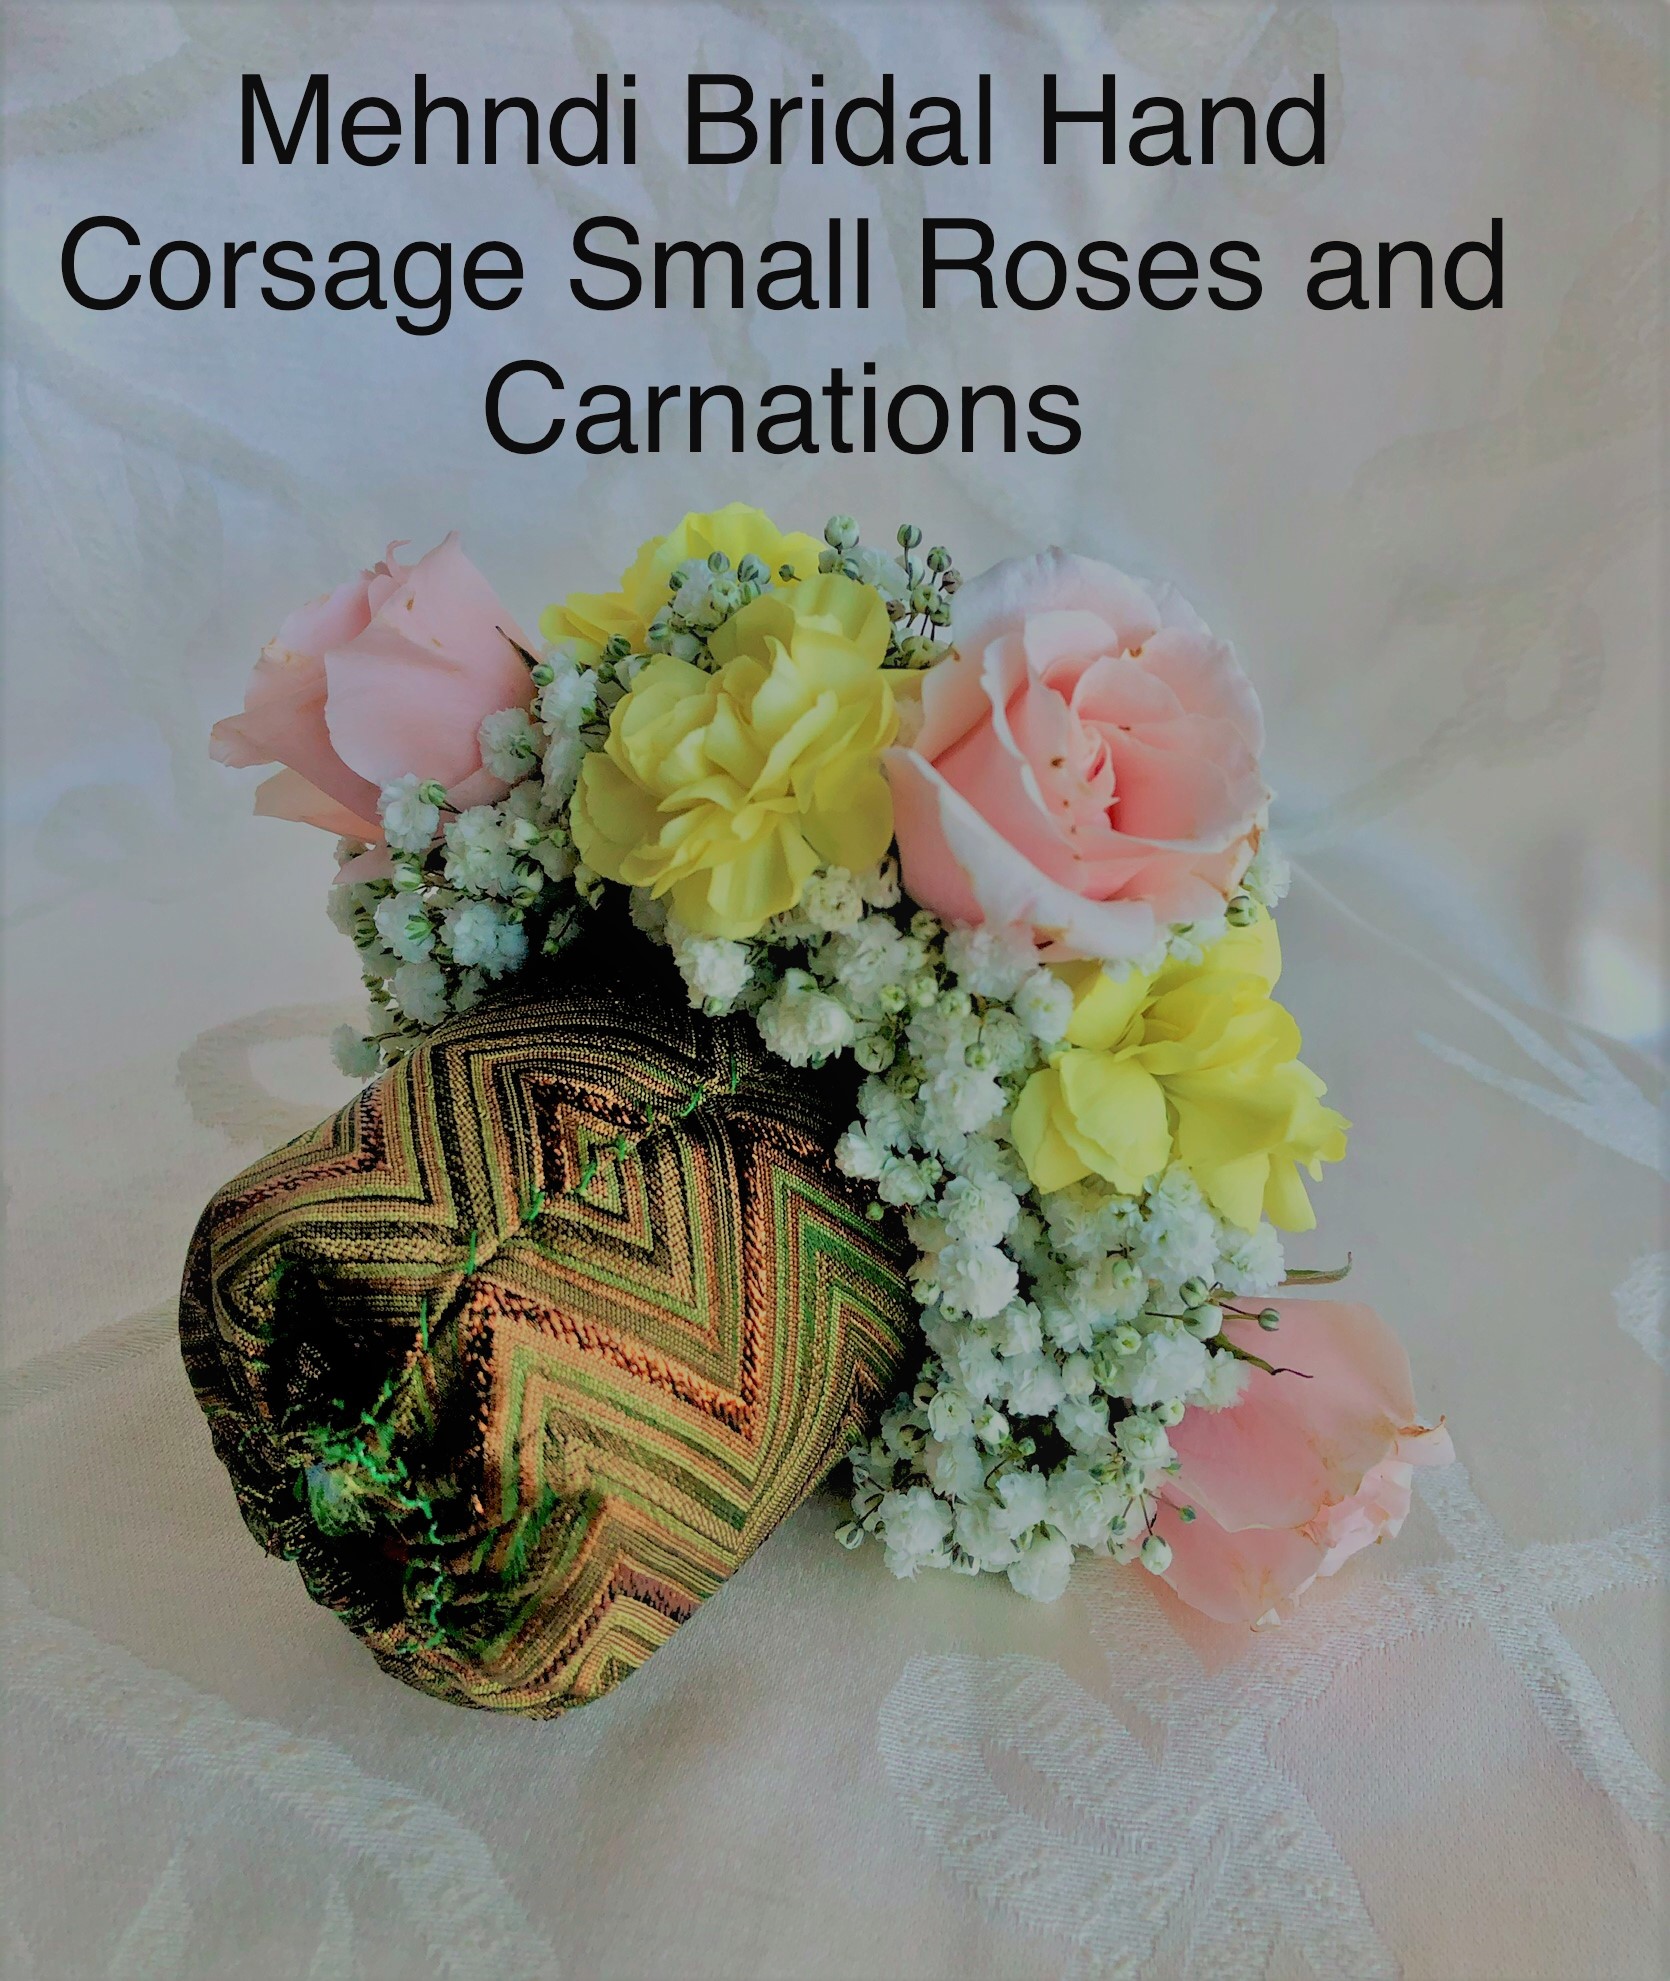 $257.50 each - Bridal Mehndi Hand Corsage Small Roses and Carnations 